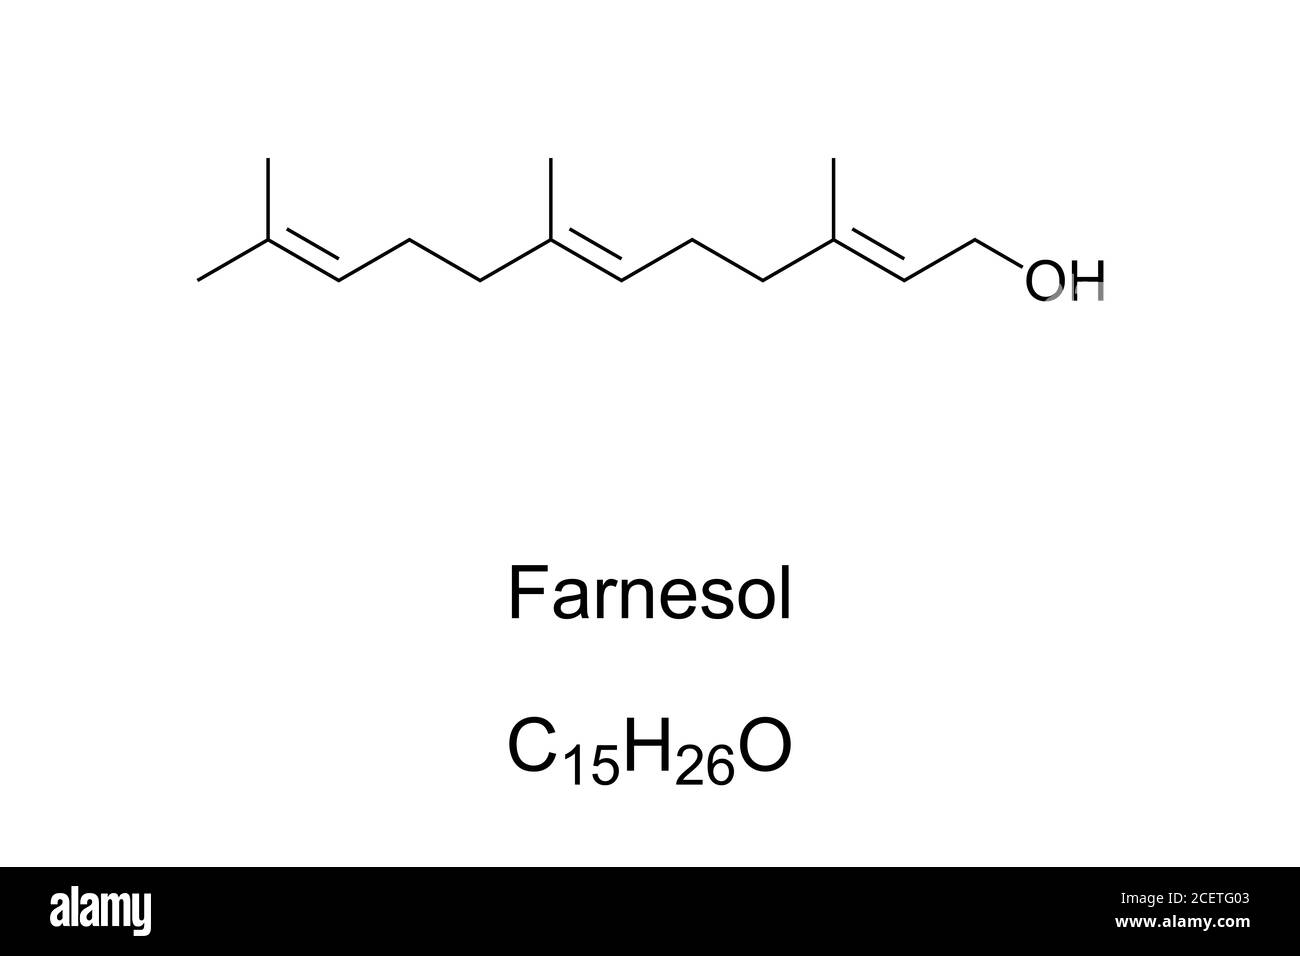 Farnesol, chemical structure. Present in many essential oils such as citronella, neroli, rose and lemon grass. Used in perfumery. Stock Photo